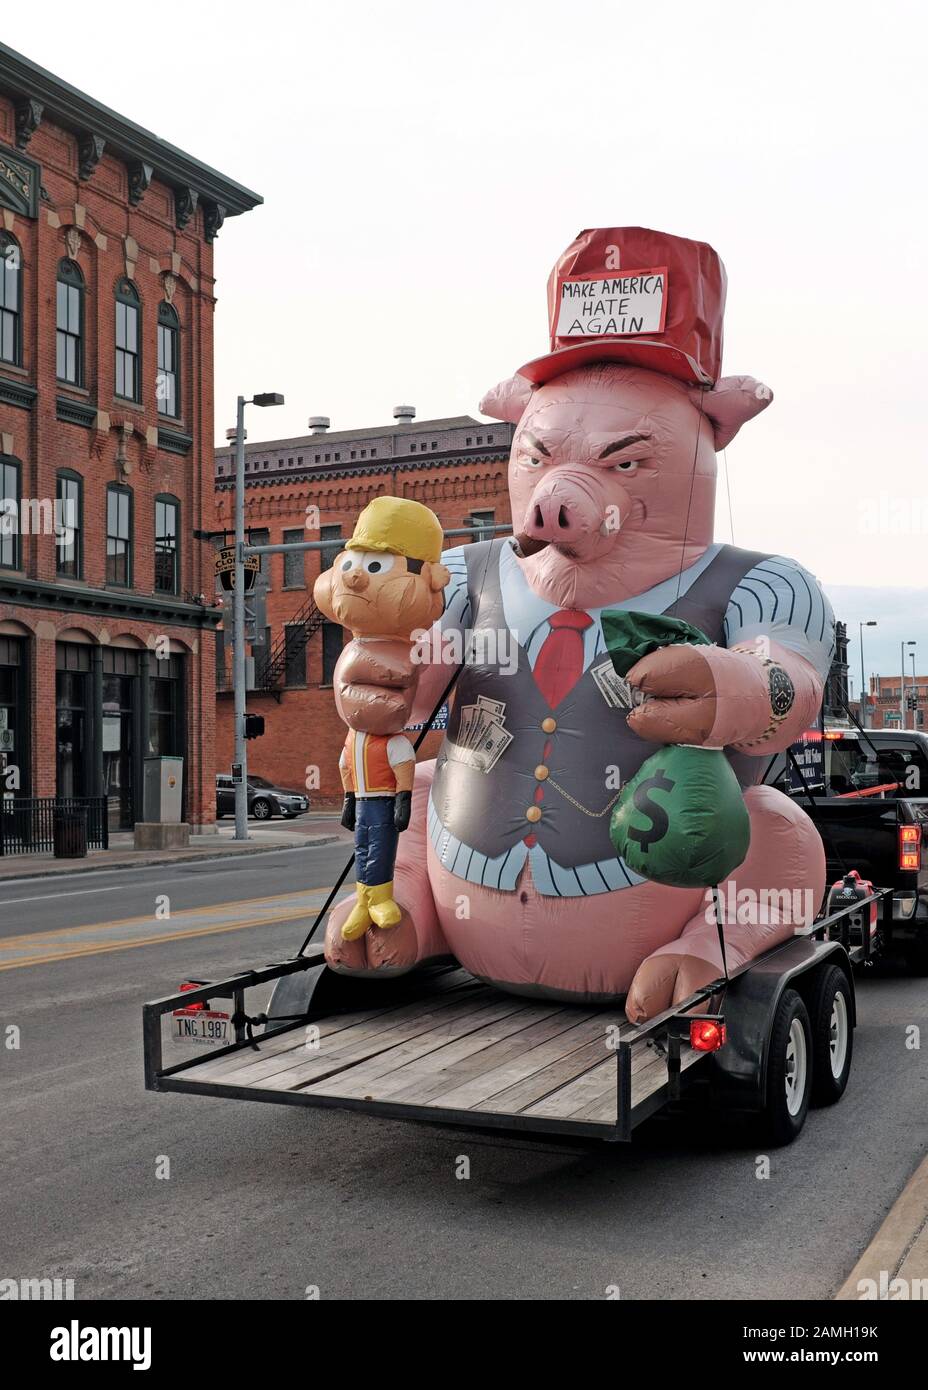 An inflatible pig with a hat stating 'Make America Hate Again' represents greed and profit at the expense of the working class. Stock Photo